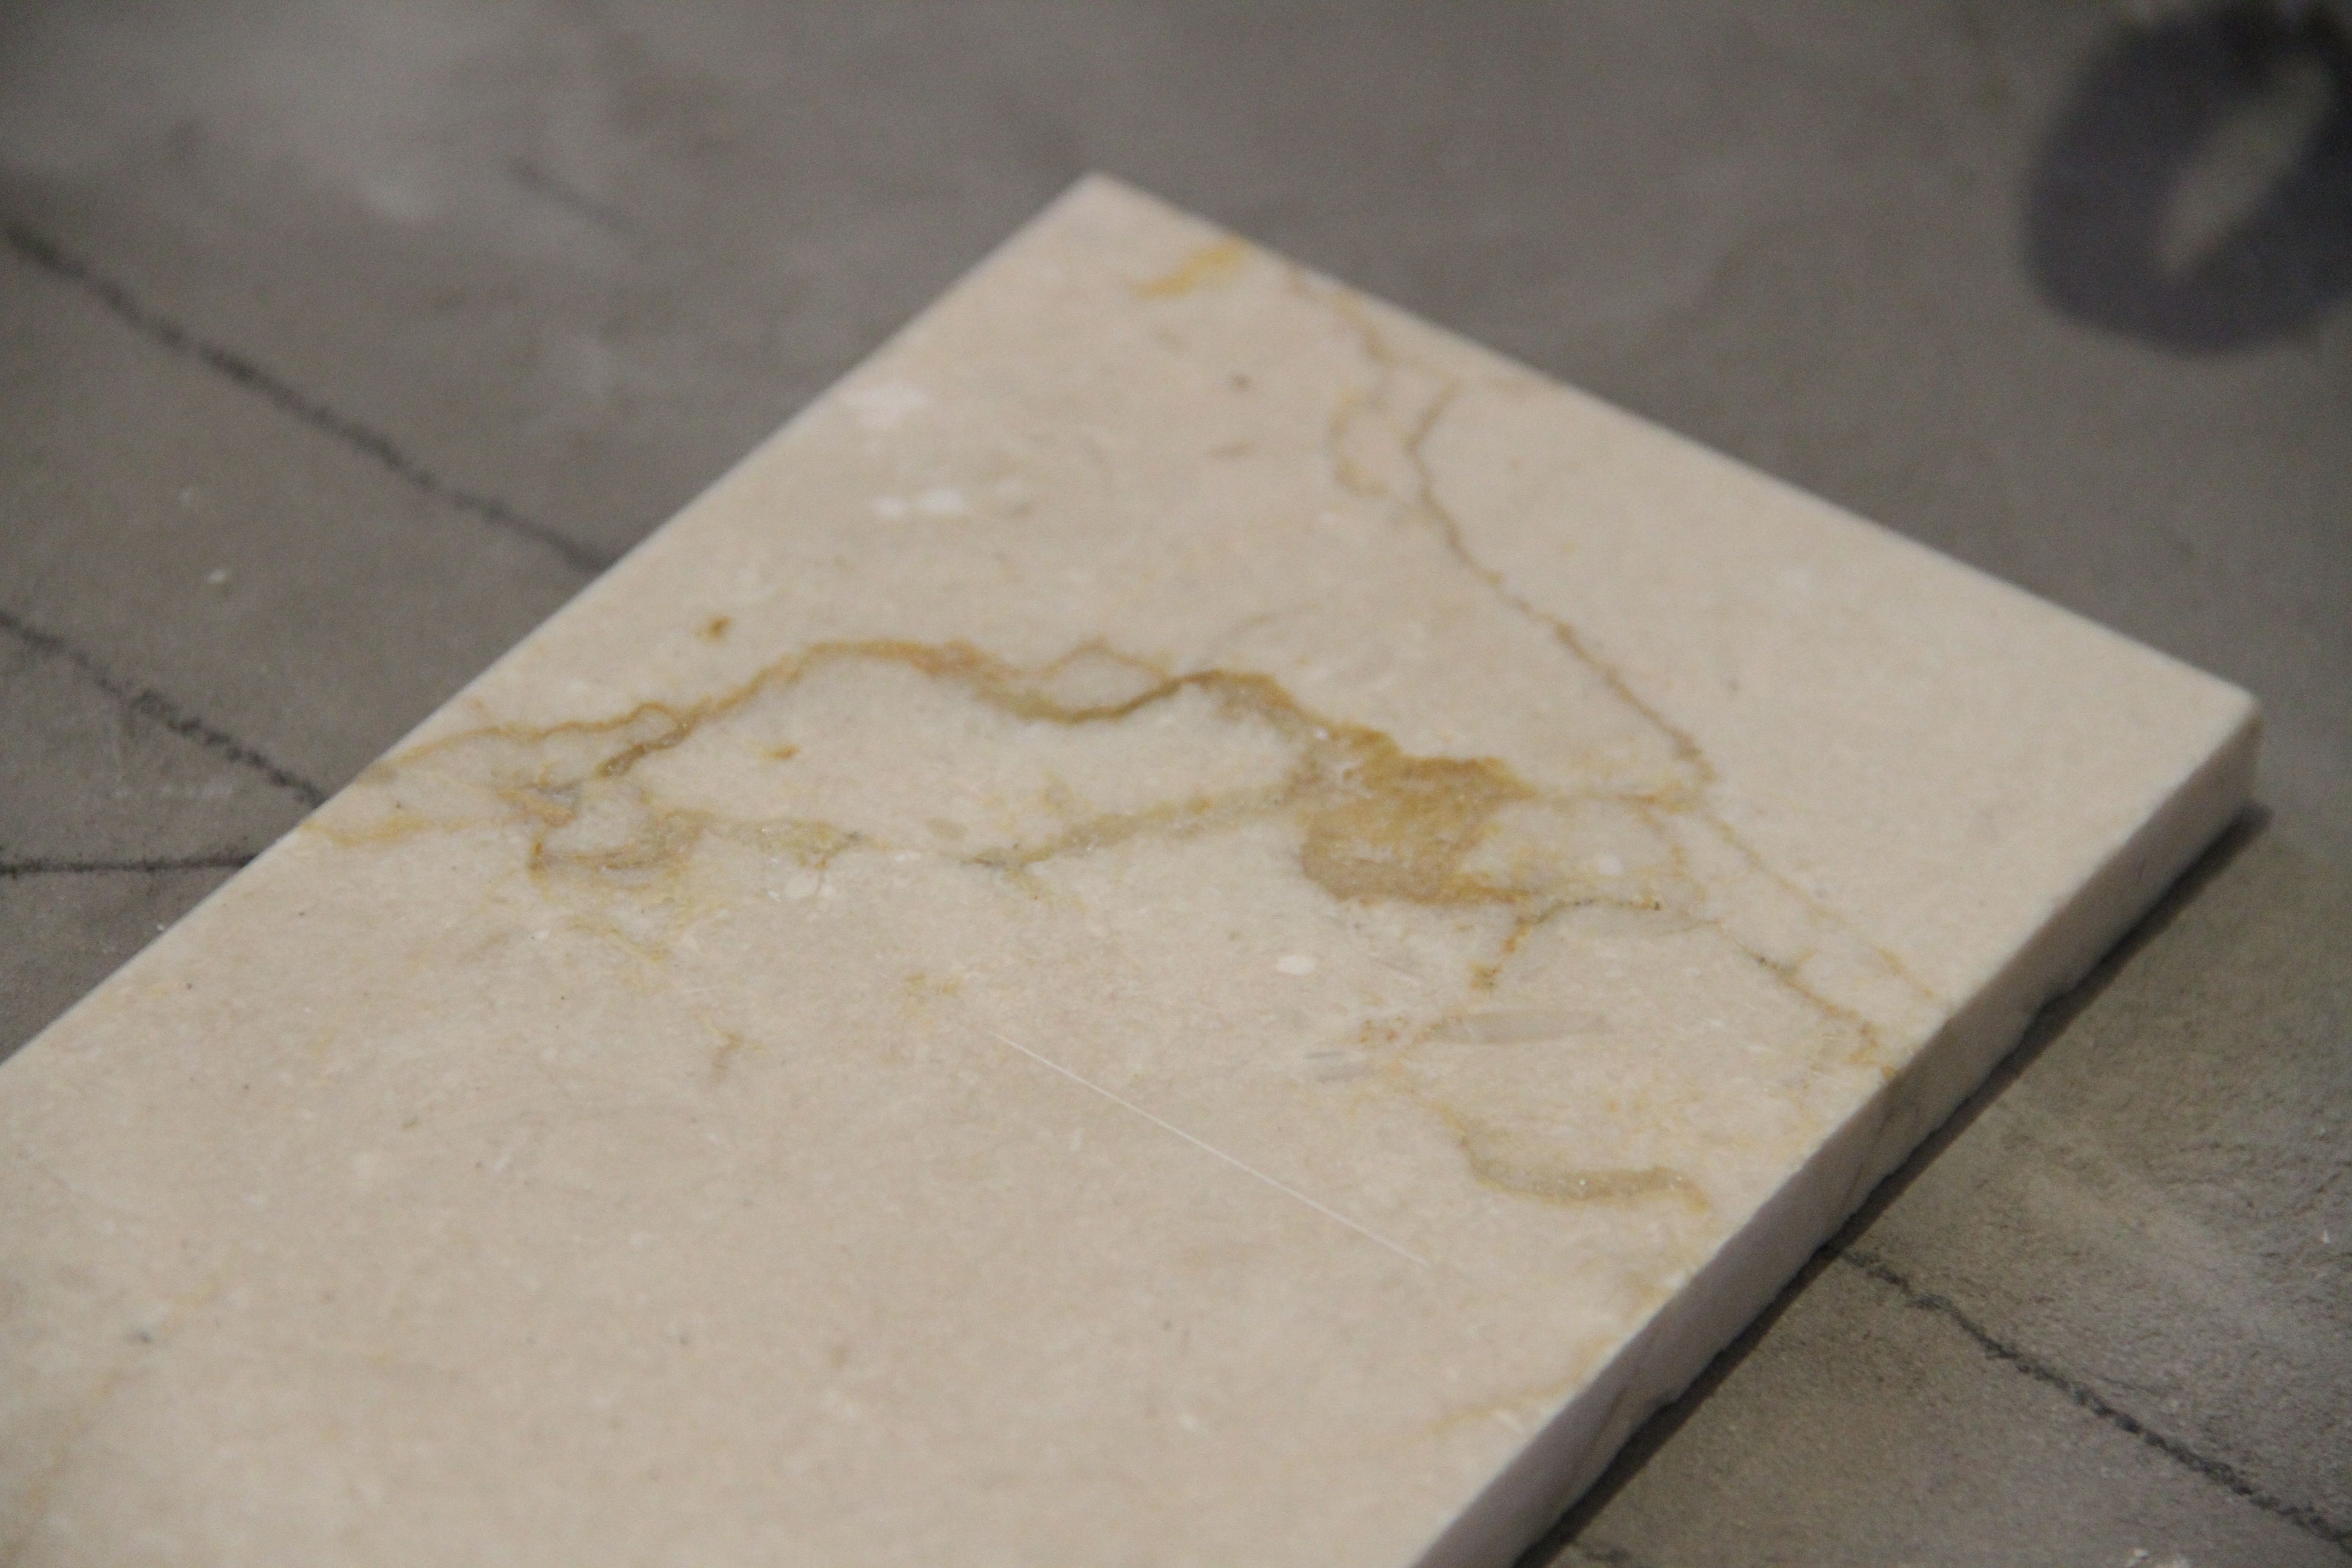 This is the crema marfil marble we ended up finding on super sale at ASN Tile. This room is absolutely about making the very best design we can with the best materials we could afford.